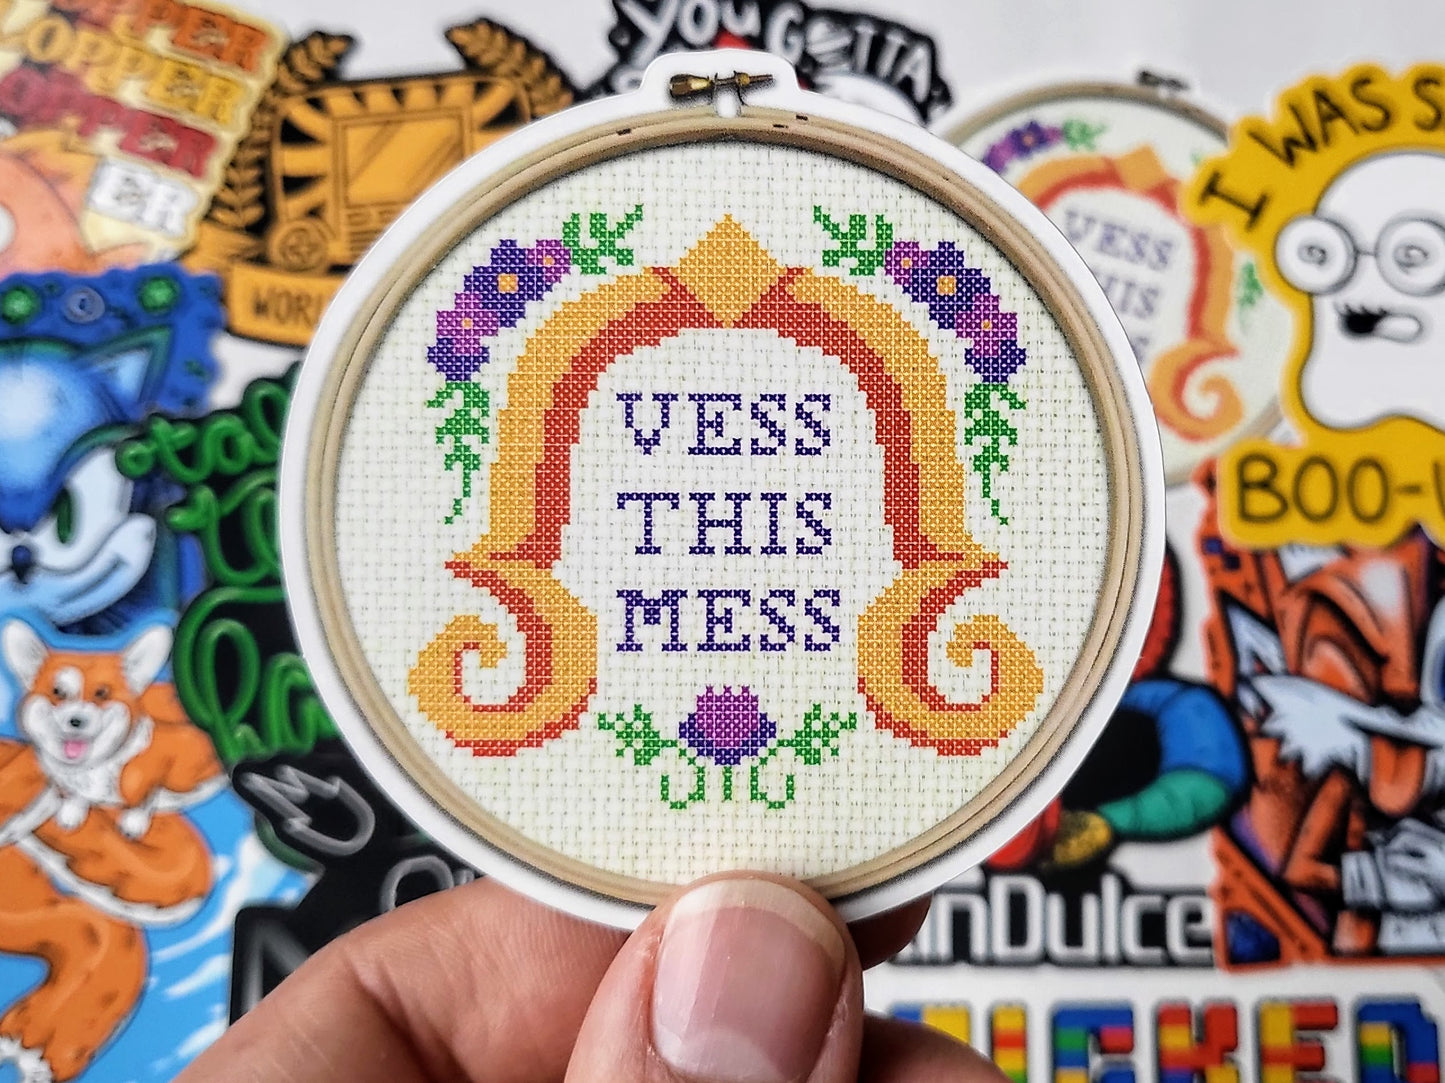 Vess This Mess - Funny Sticker for Magic the Gathering Fans